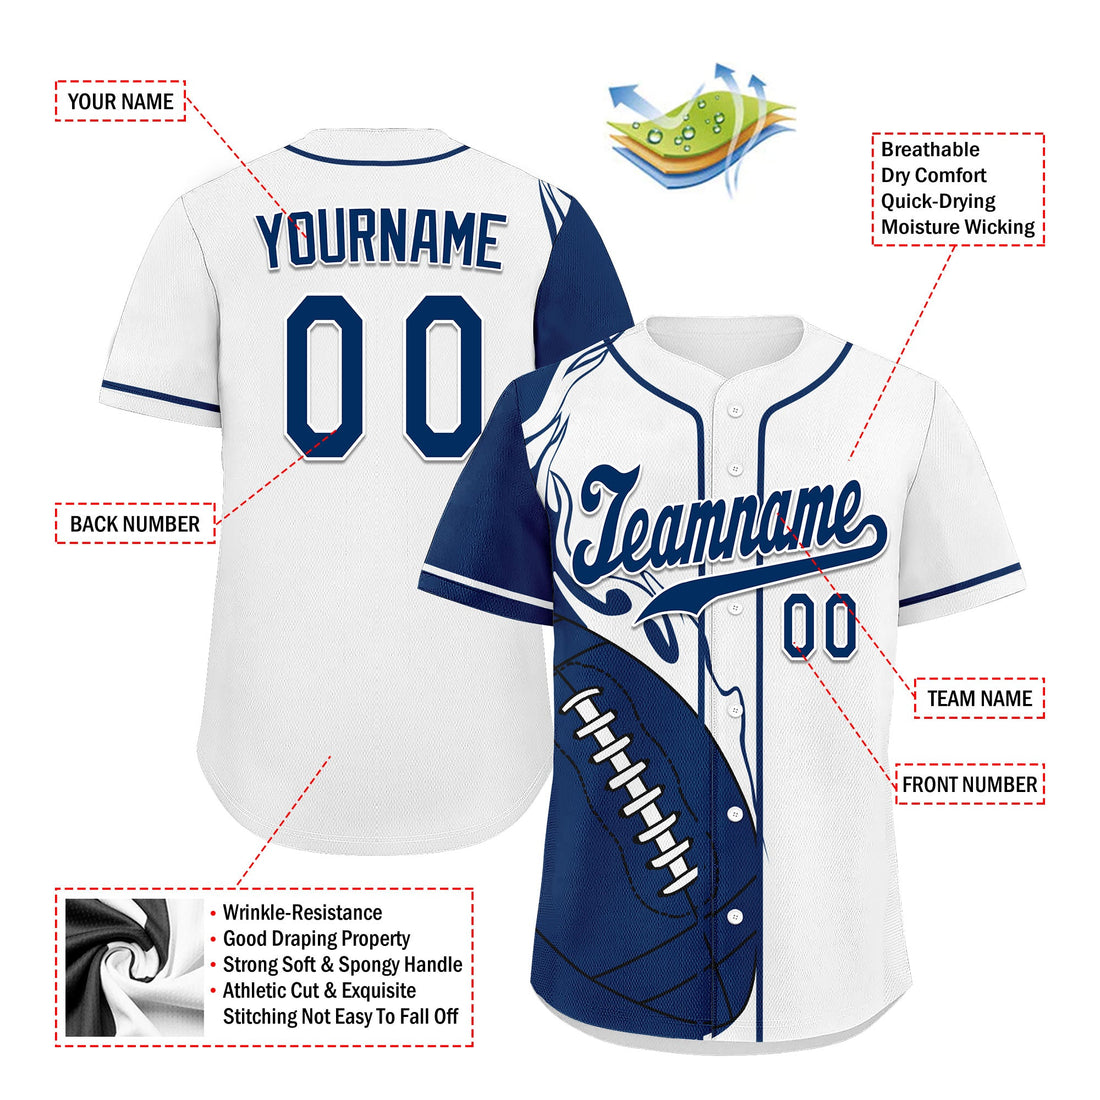 Custom White Blue Classic Style Personalized Authentic Baseball Jersey UN002-D0b0a00-ad